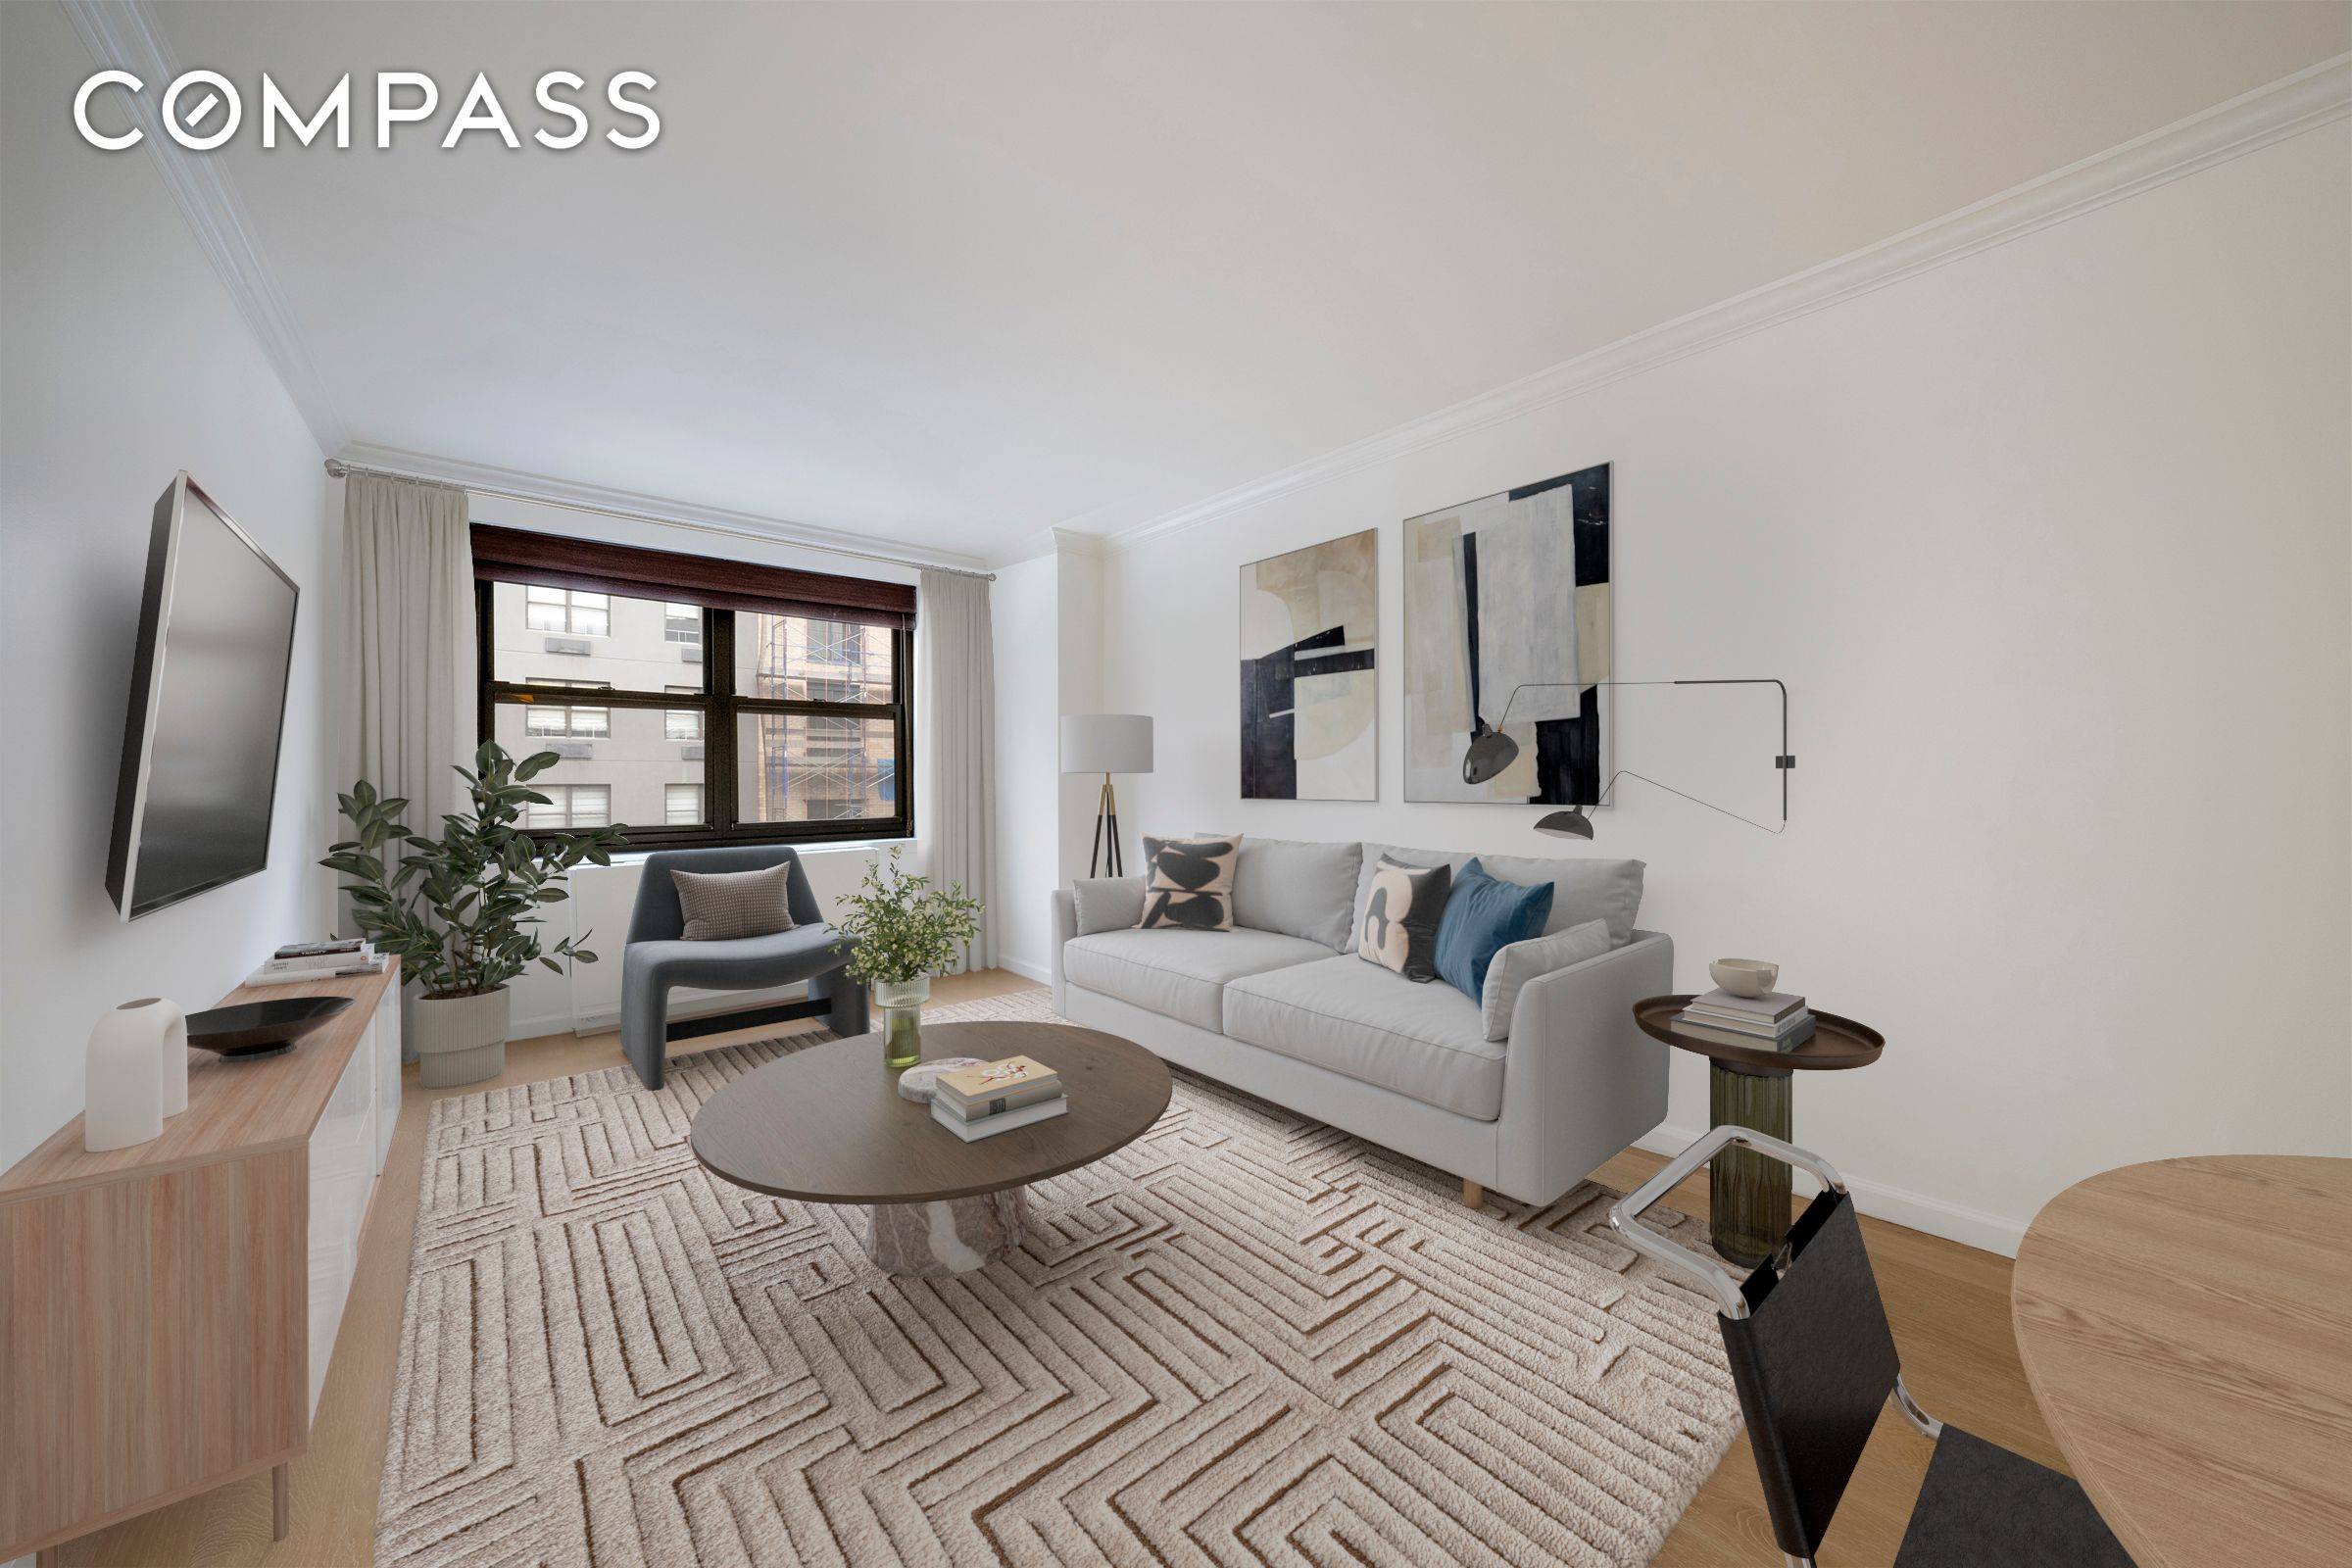 Come home to this renovated one bedroom, one bath home located downtown at the crossroads of Gramercy, Kips Bay and Murray Hill.